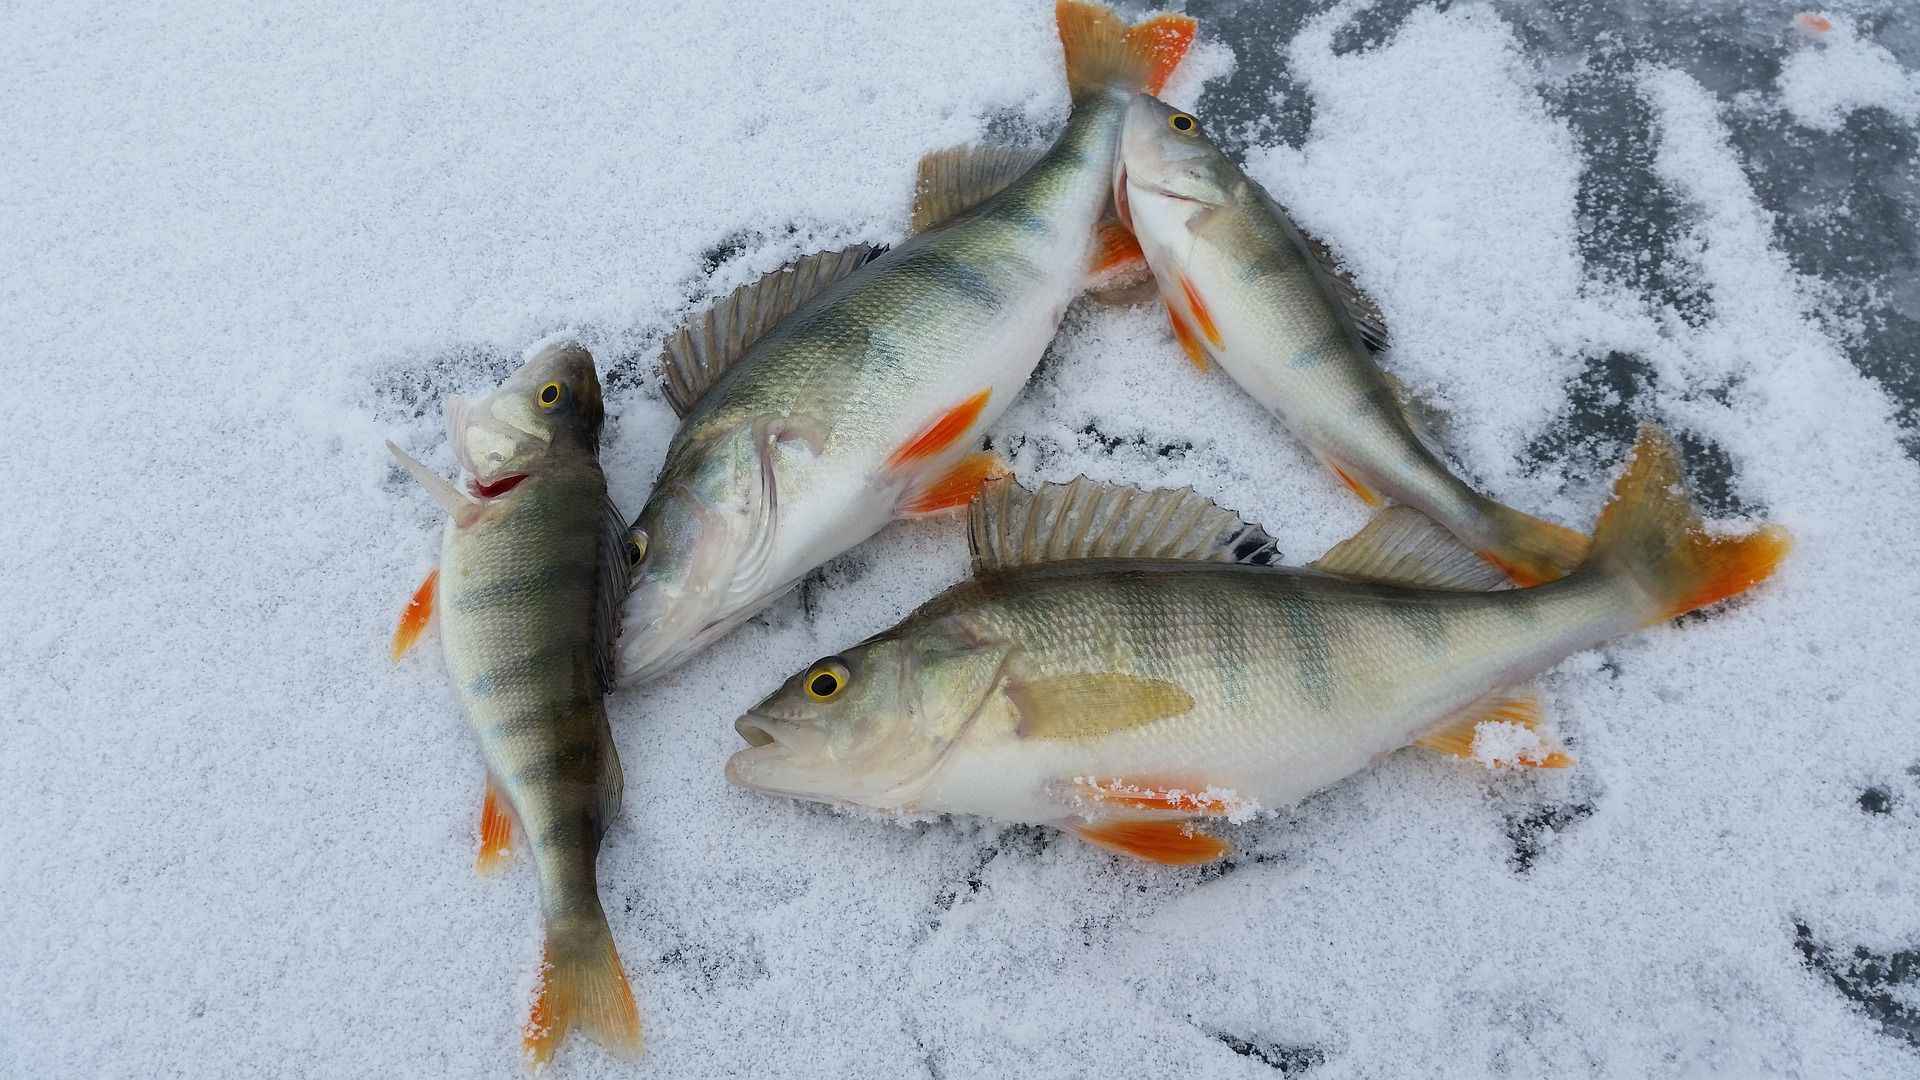 Top 6 Ice Fishing Targets: What can you expect to catch when Ice Fishing?